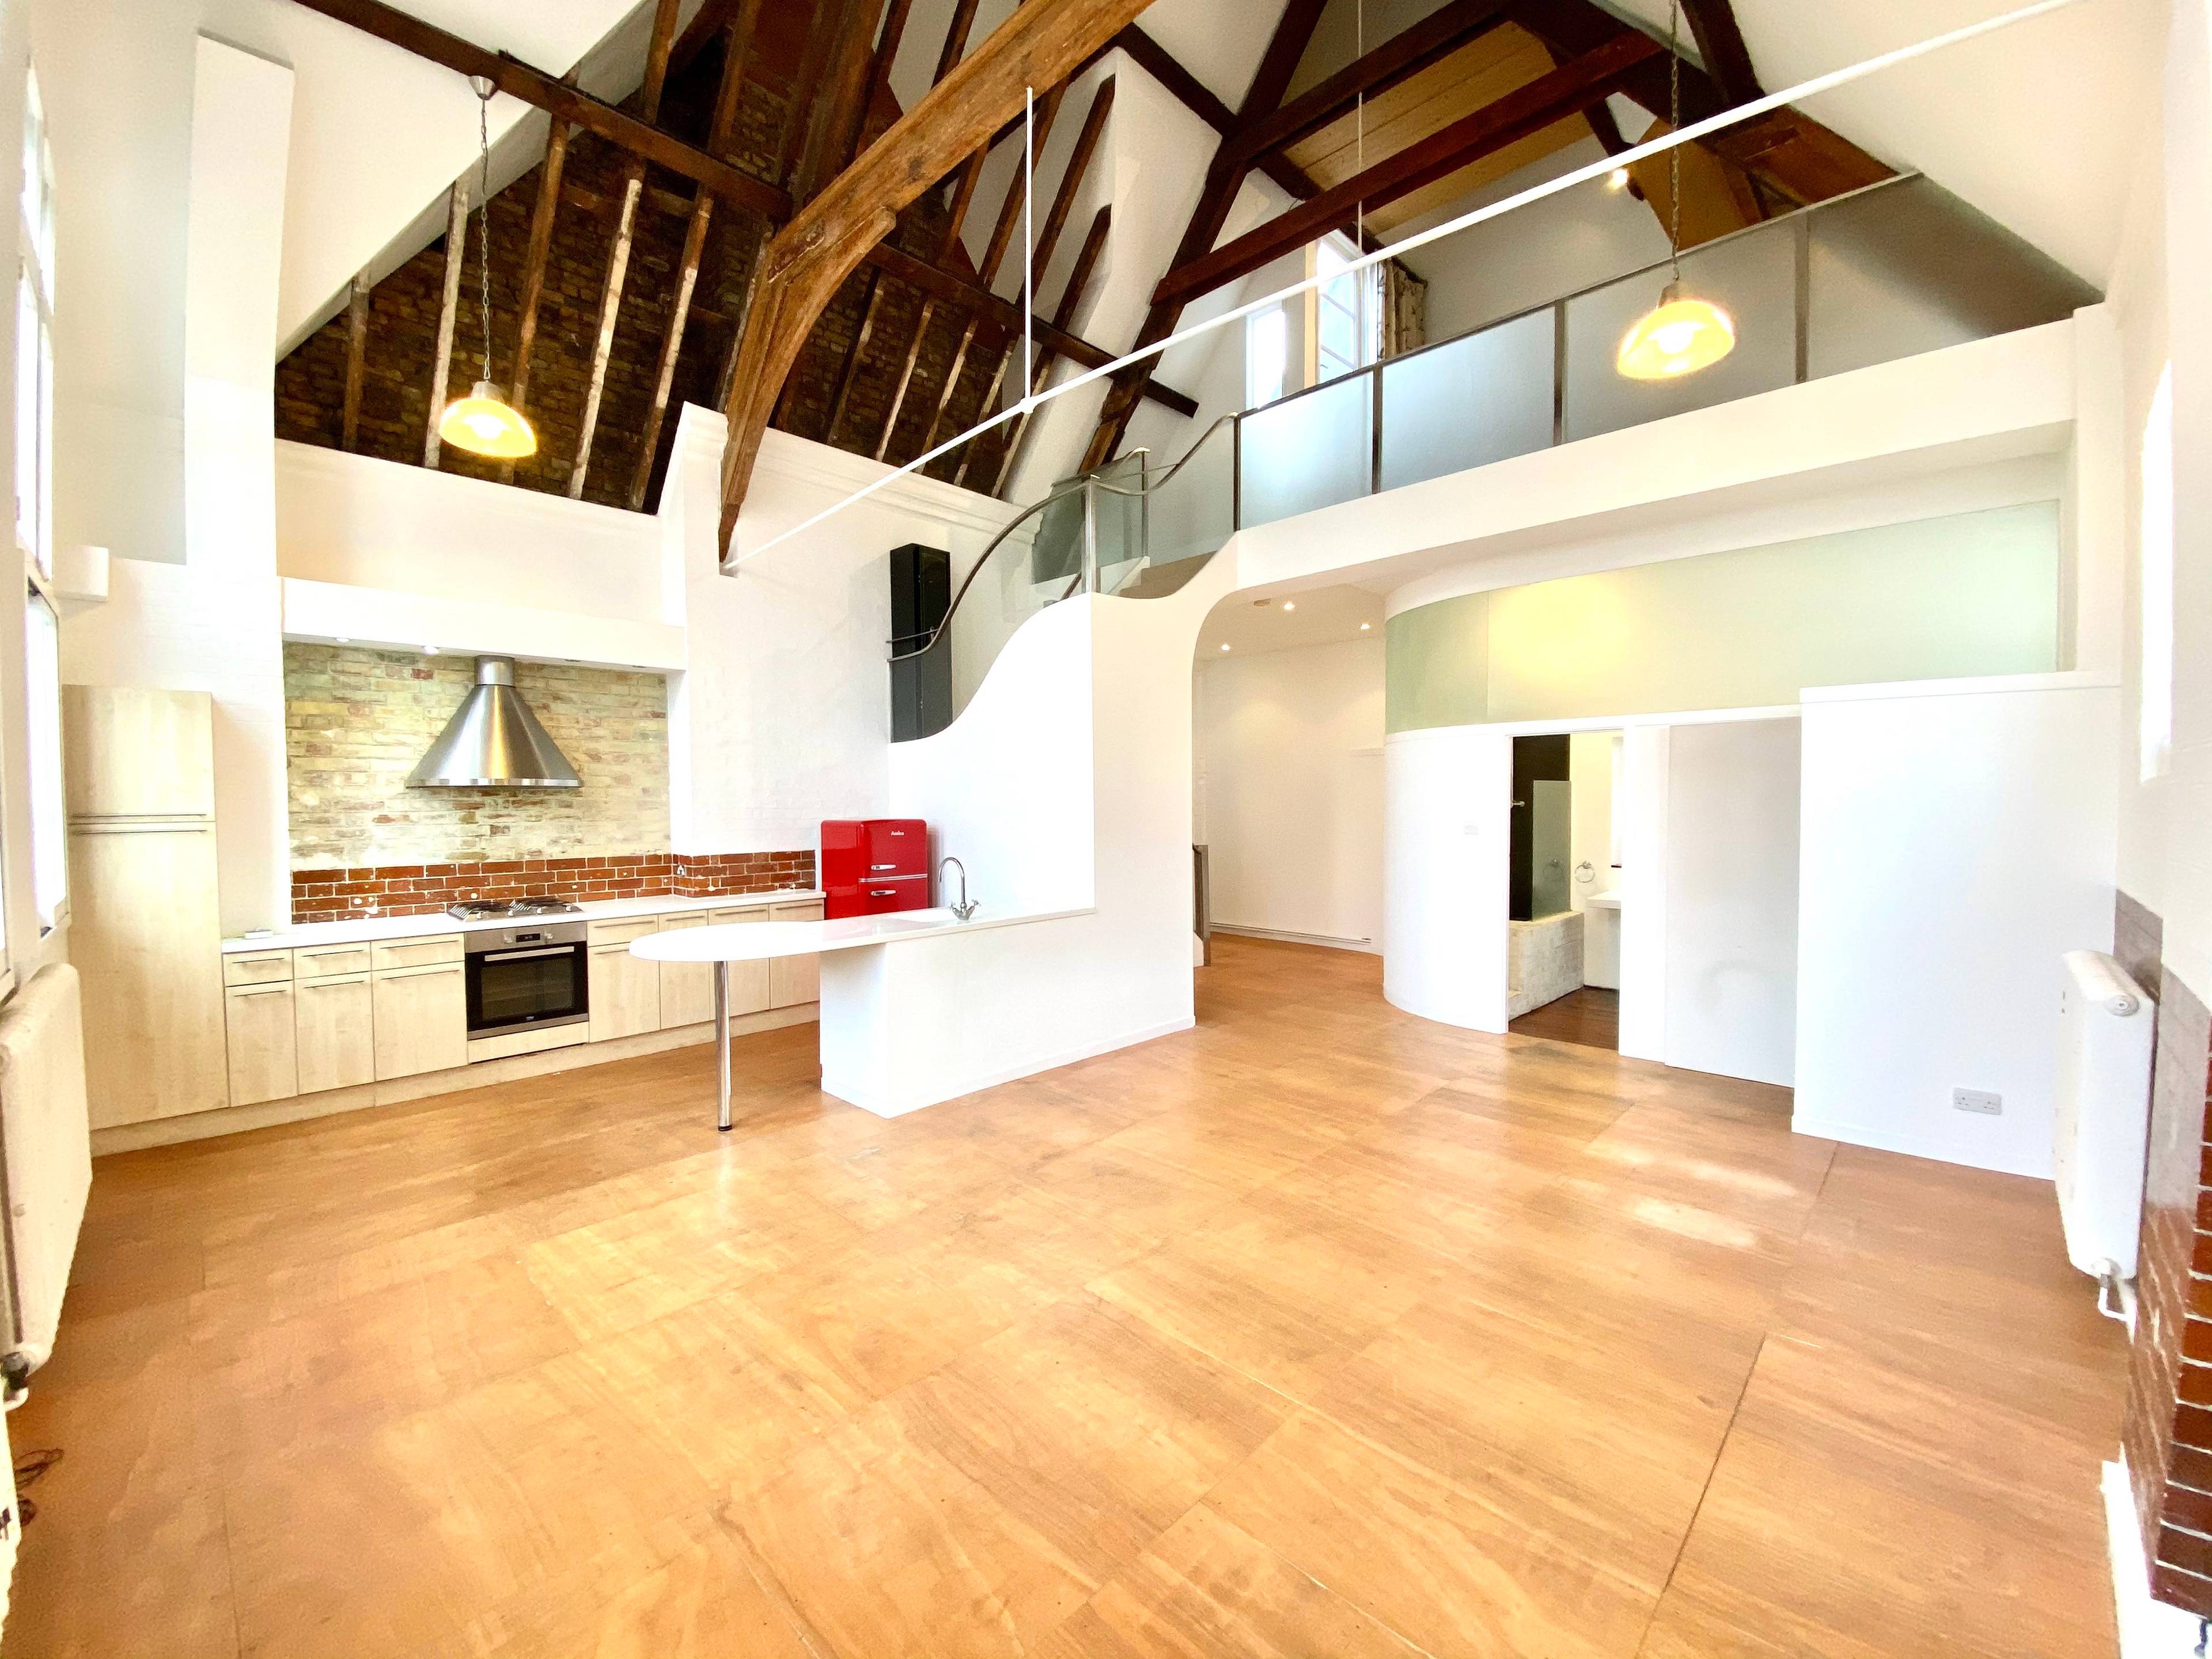 Boasting double height ceilings, this amazing property retains most of its original school house features, including parquet flooring, gigantic windows, and a decked roof terrace.